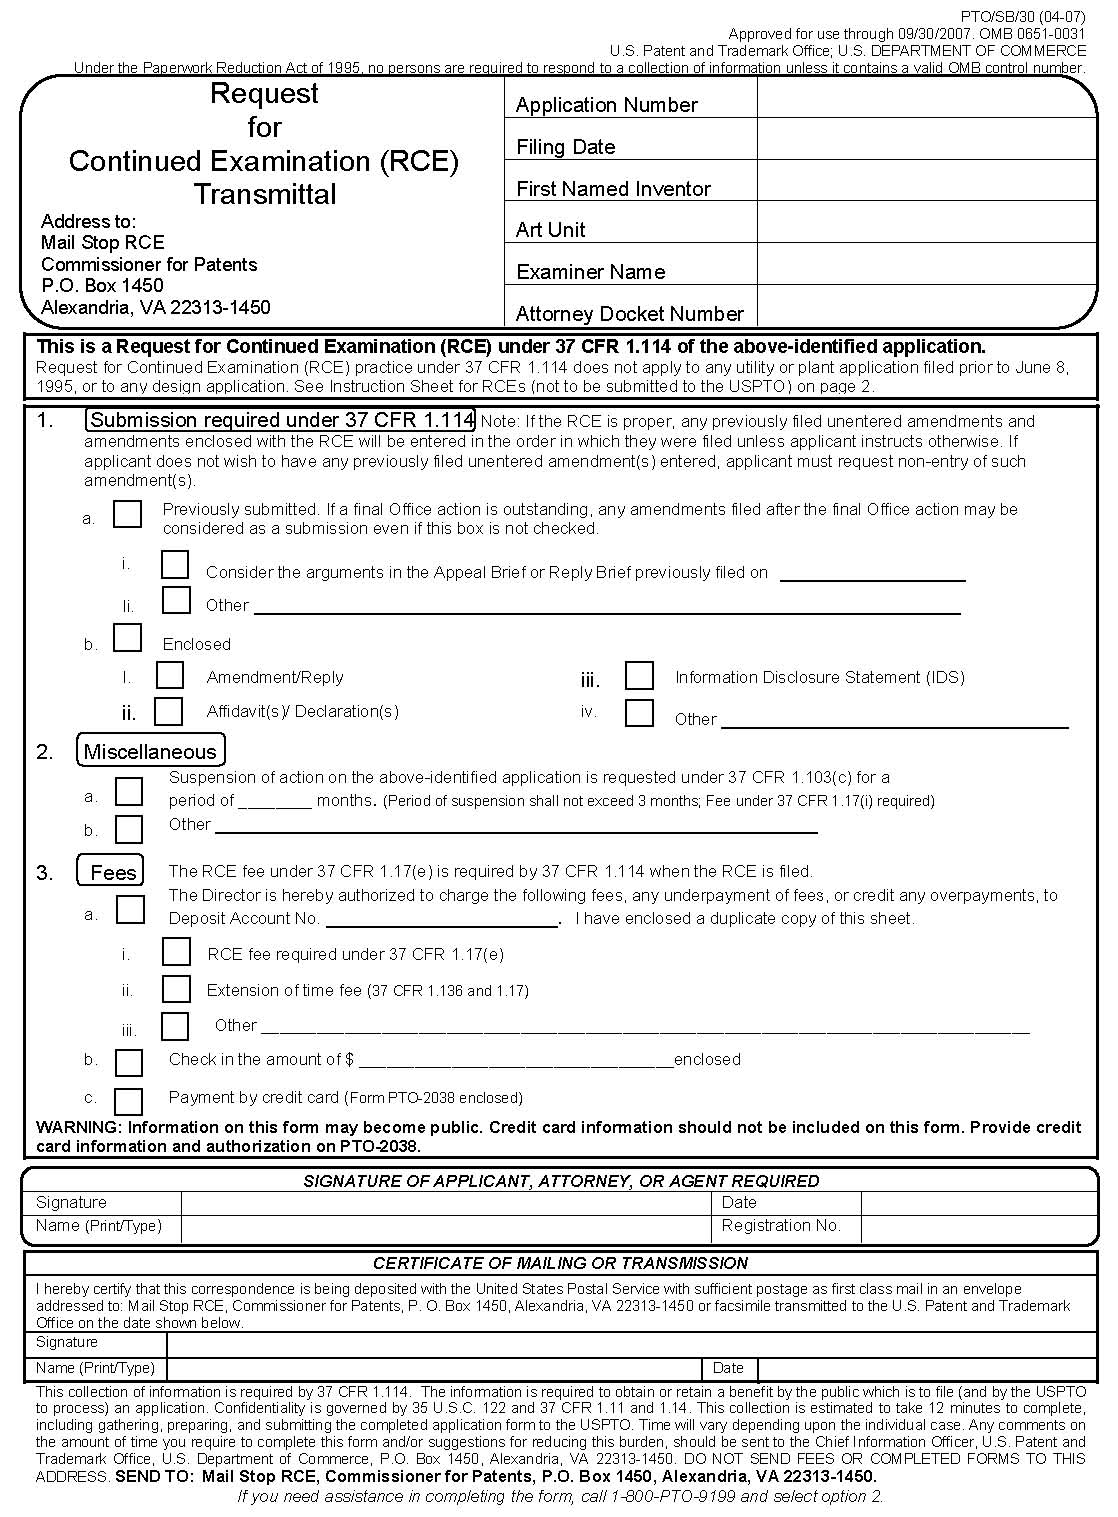 form pto/sb/30. request for continued examination (rce) transmittal